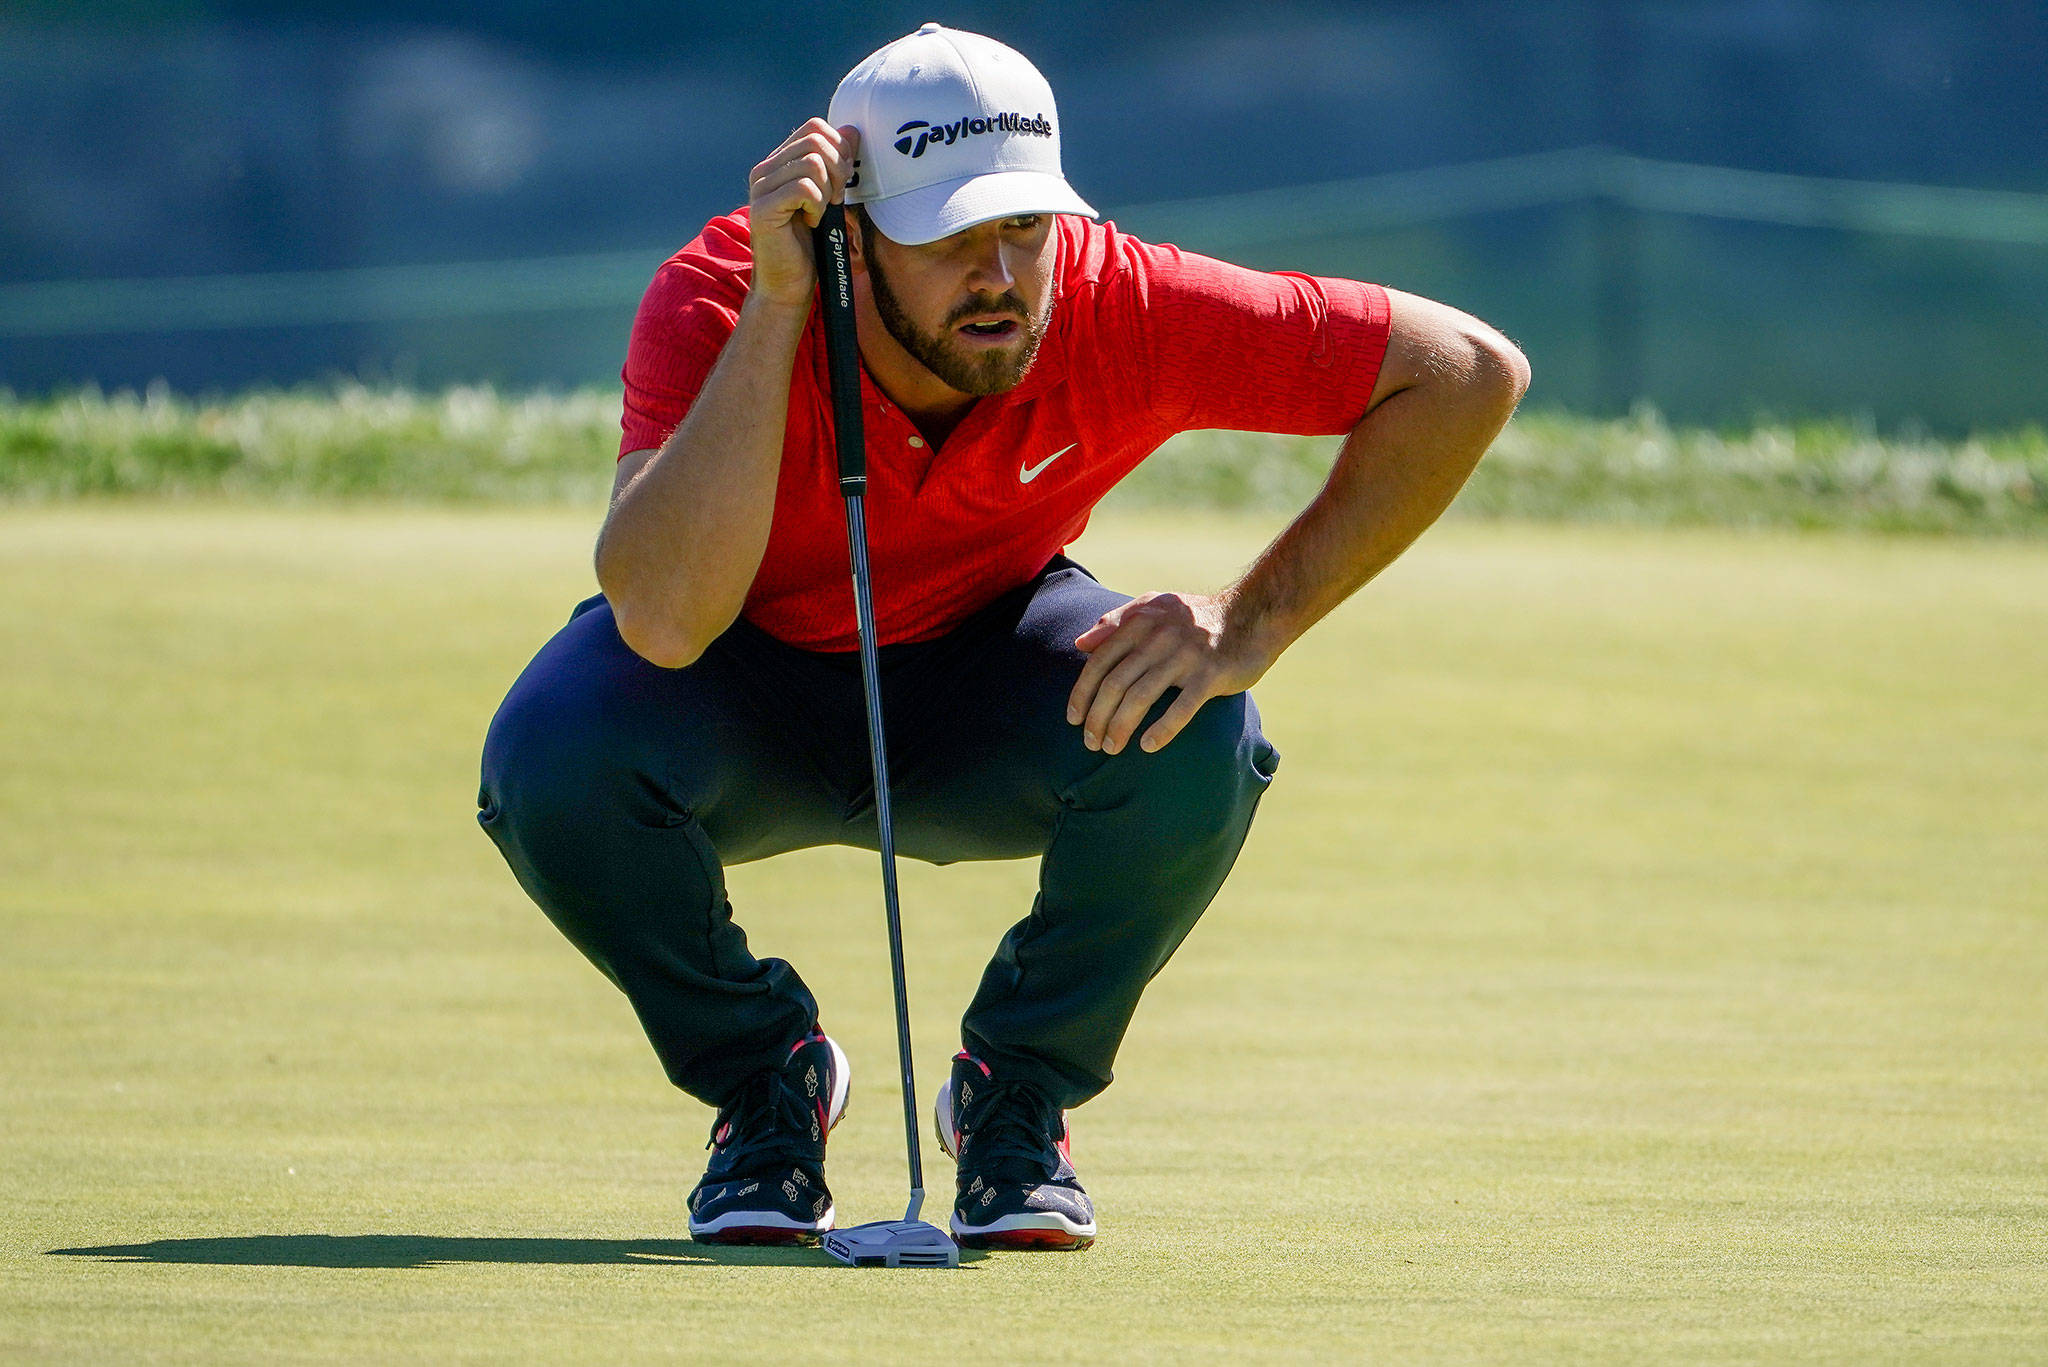 Matthew Wolff lines up a putt on the second green during the third round of the U.S. Open on Sept. 19, 2020, in Mamaroneck, N.Y. (AP Photo/John Minchillo)